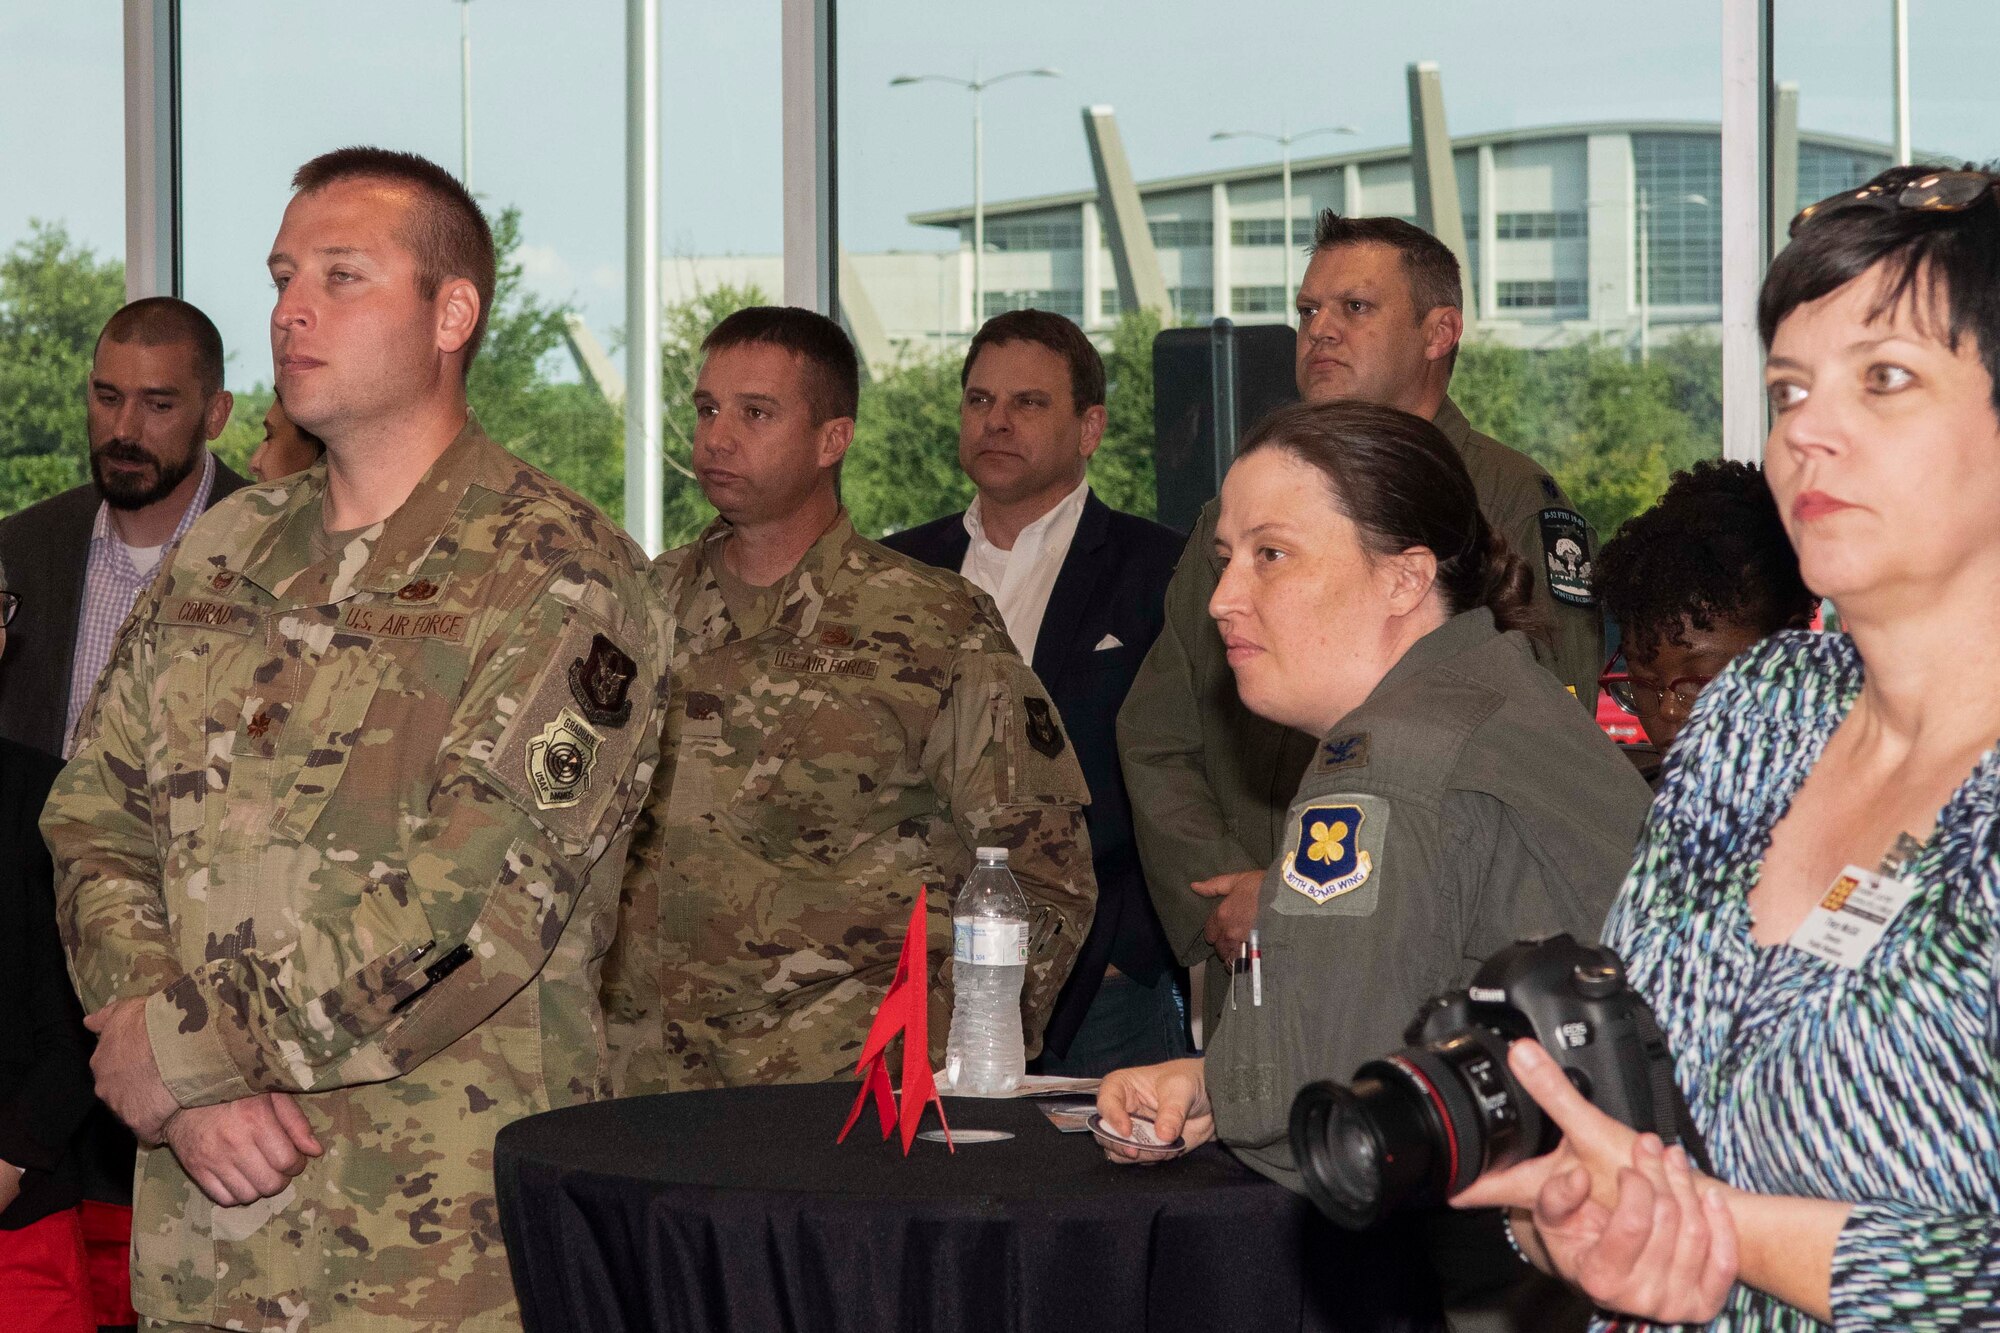 Airmen from Barksdale Air Force Base watch a presentation during the inaugural Air Show Innovation Showcase at Bossier Parish Community College, Bossier City, Louisiana, May 14, 2019.  The event, partially sponsored by the 307th Bomb Wing highlighted the efforts of regional businesses in the Entrepreneurial Accelerator Program as well as those of students at Bossier Parish Community College. (U.S. Air Force photo by Master Sgt. Ted Daigle)